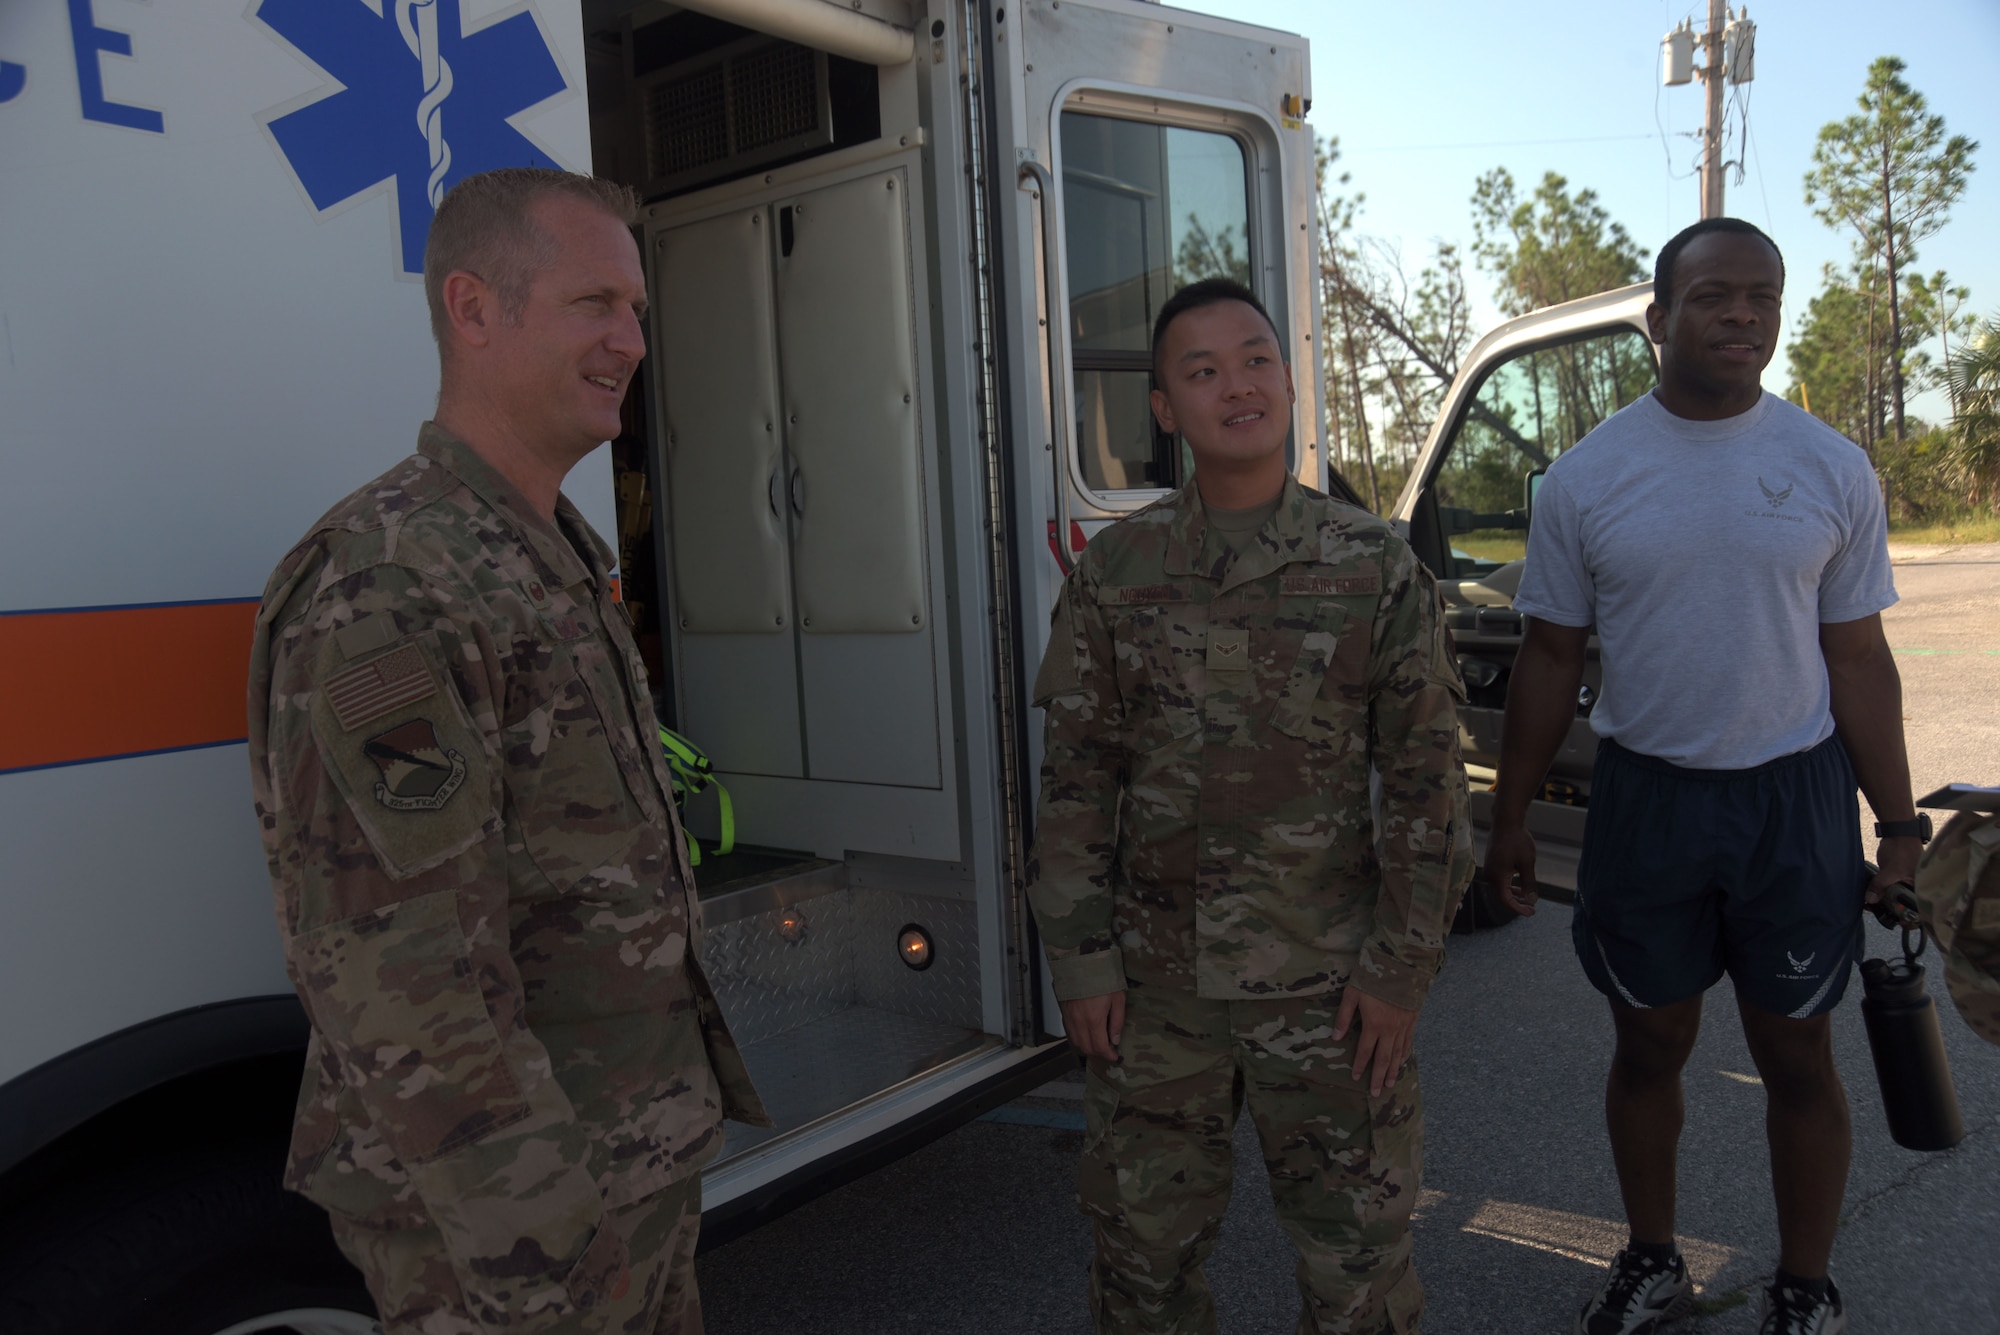 Col. Brian Laidlaw, 325th Fighter Wing commander, left, Airman 1st Class Brian Nguyen, center, and Senior Airman Zachary Collins, 325th Operational Medical Readiness Squadron Ambulance Services Department medics, have a discussion at a medical response exercise scene Oct. 4, 2019, at Tyndall Air Force Base, Florida. The squadron was chosen by the 325th Medical Group for the commander’s Airman Shadow Program, which aims to give the commander a first-hand view of what Airmen do on the job. (U.S. Air Force photo by Staff Sgt. Magen M. Reeves)